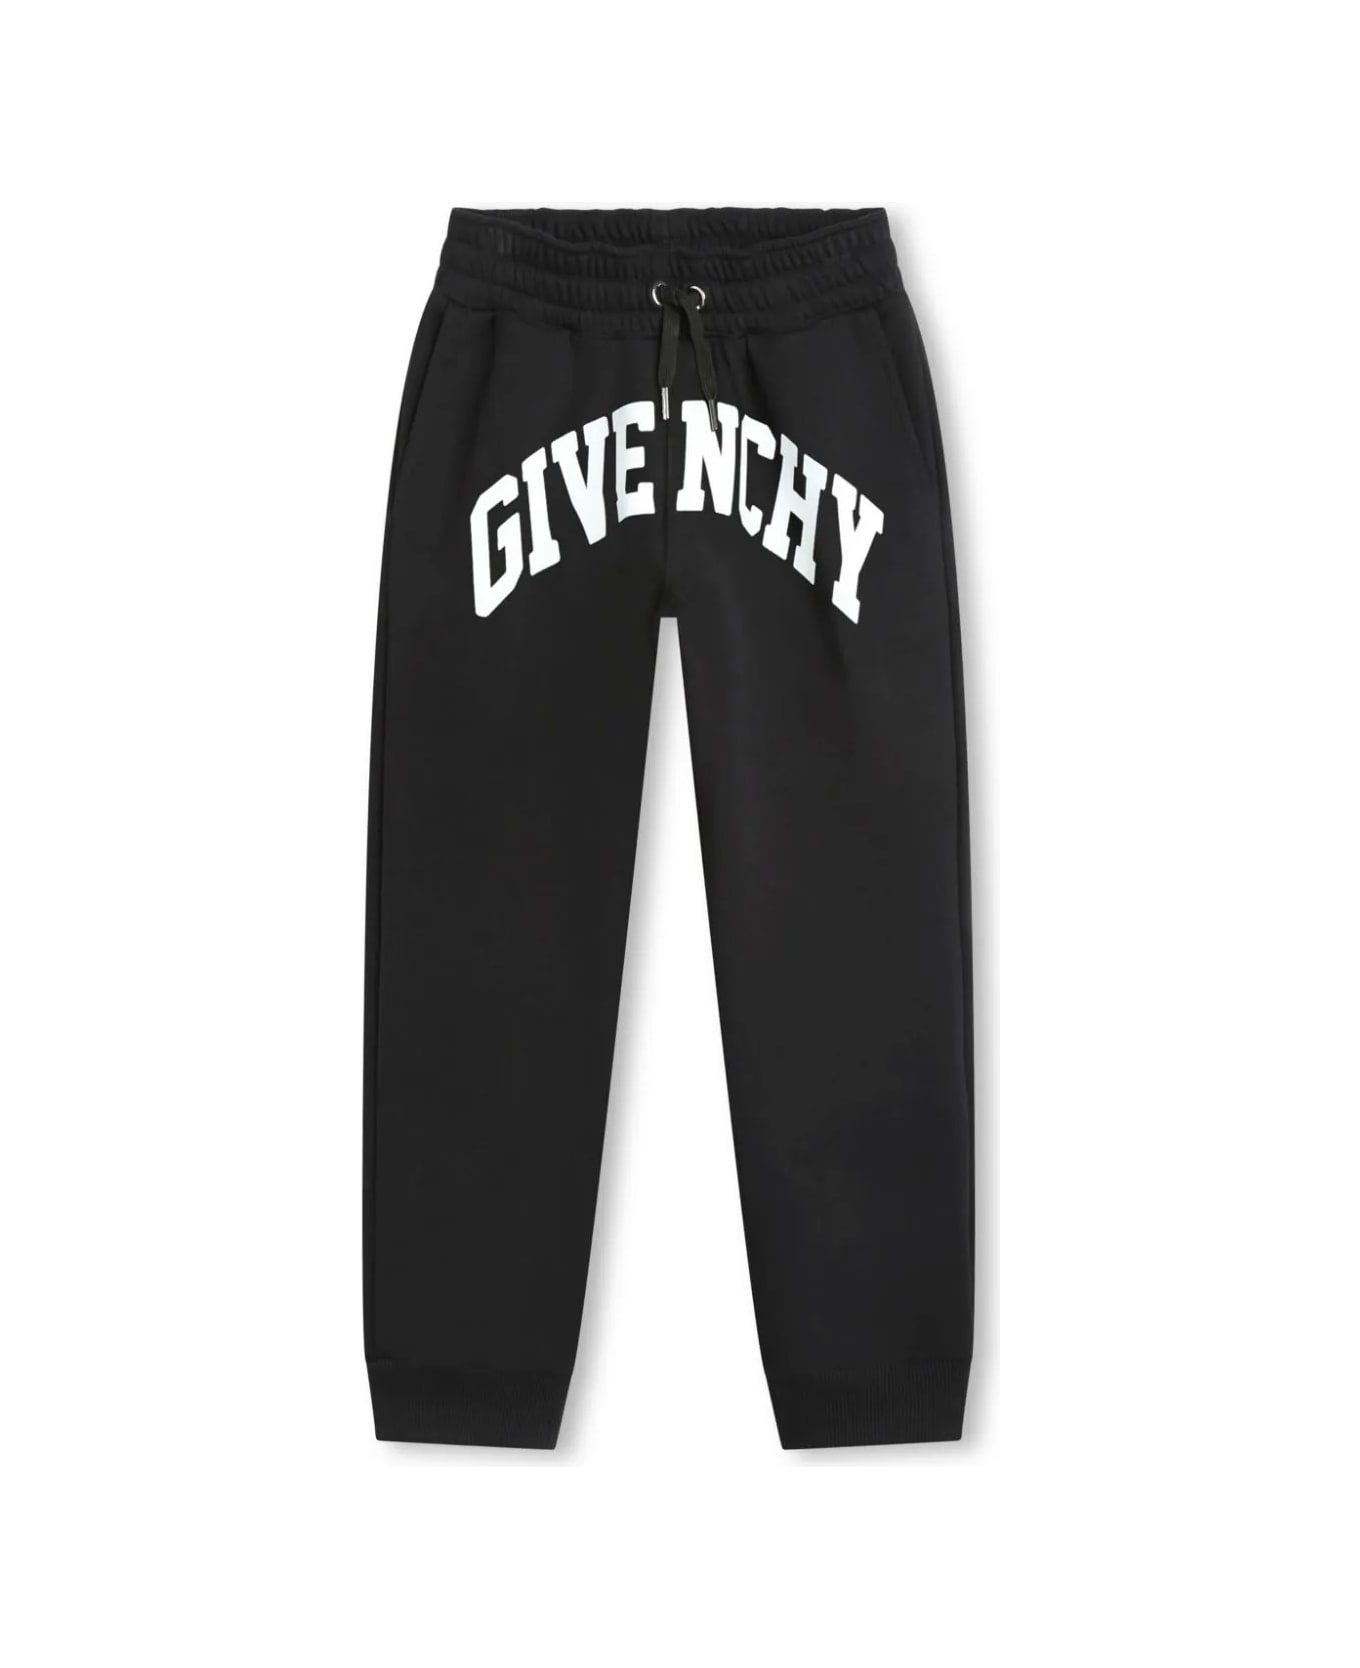 Givenchy Black Joggers With Arched Logo - B Nero